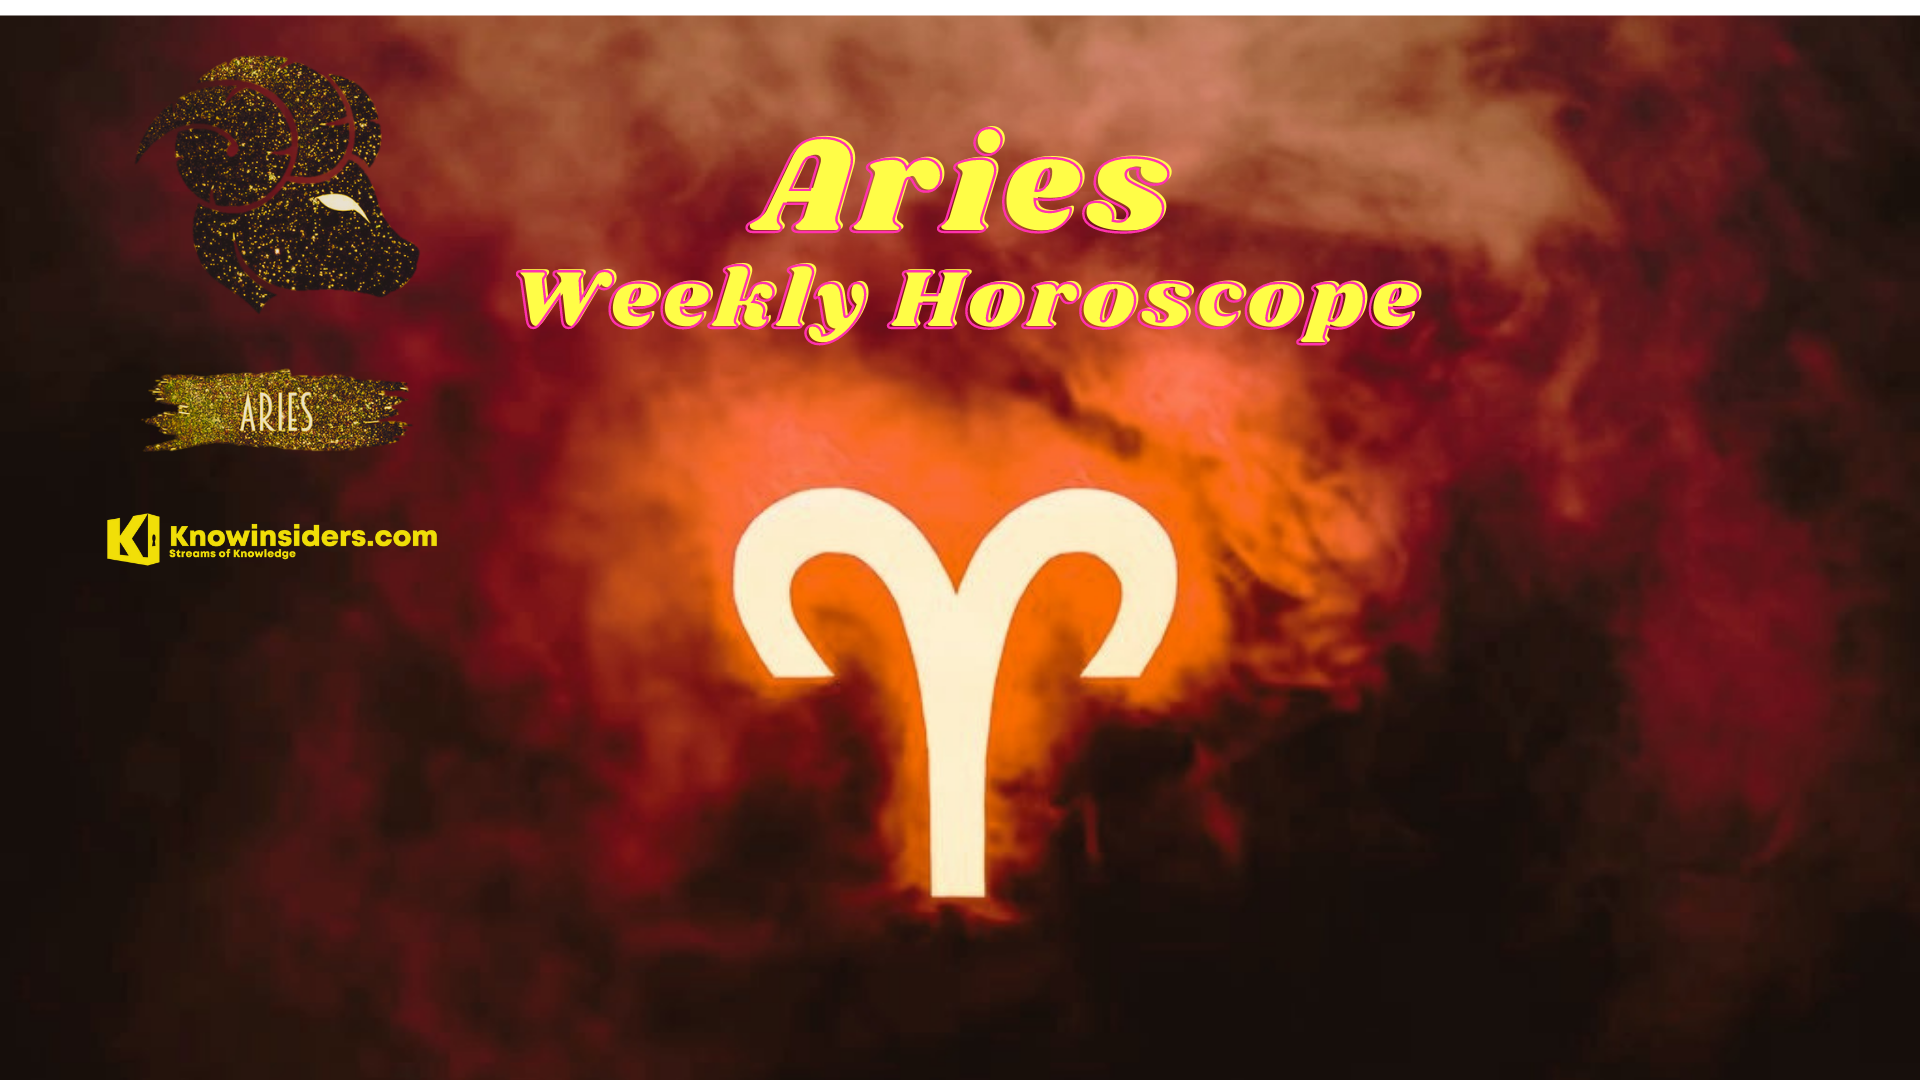 ARIES Weekly Horoscope 9 to 15 August 2021: Prediction for Love, Money, Health and Career